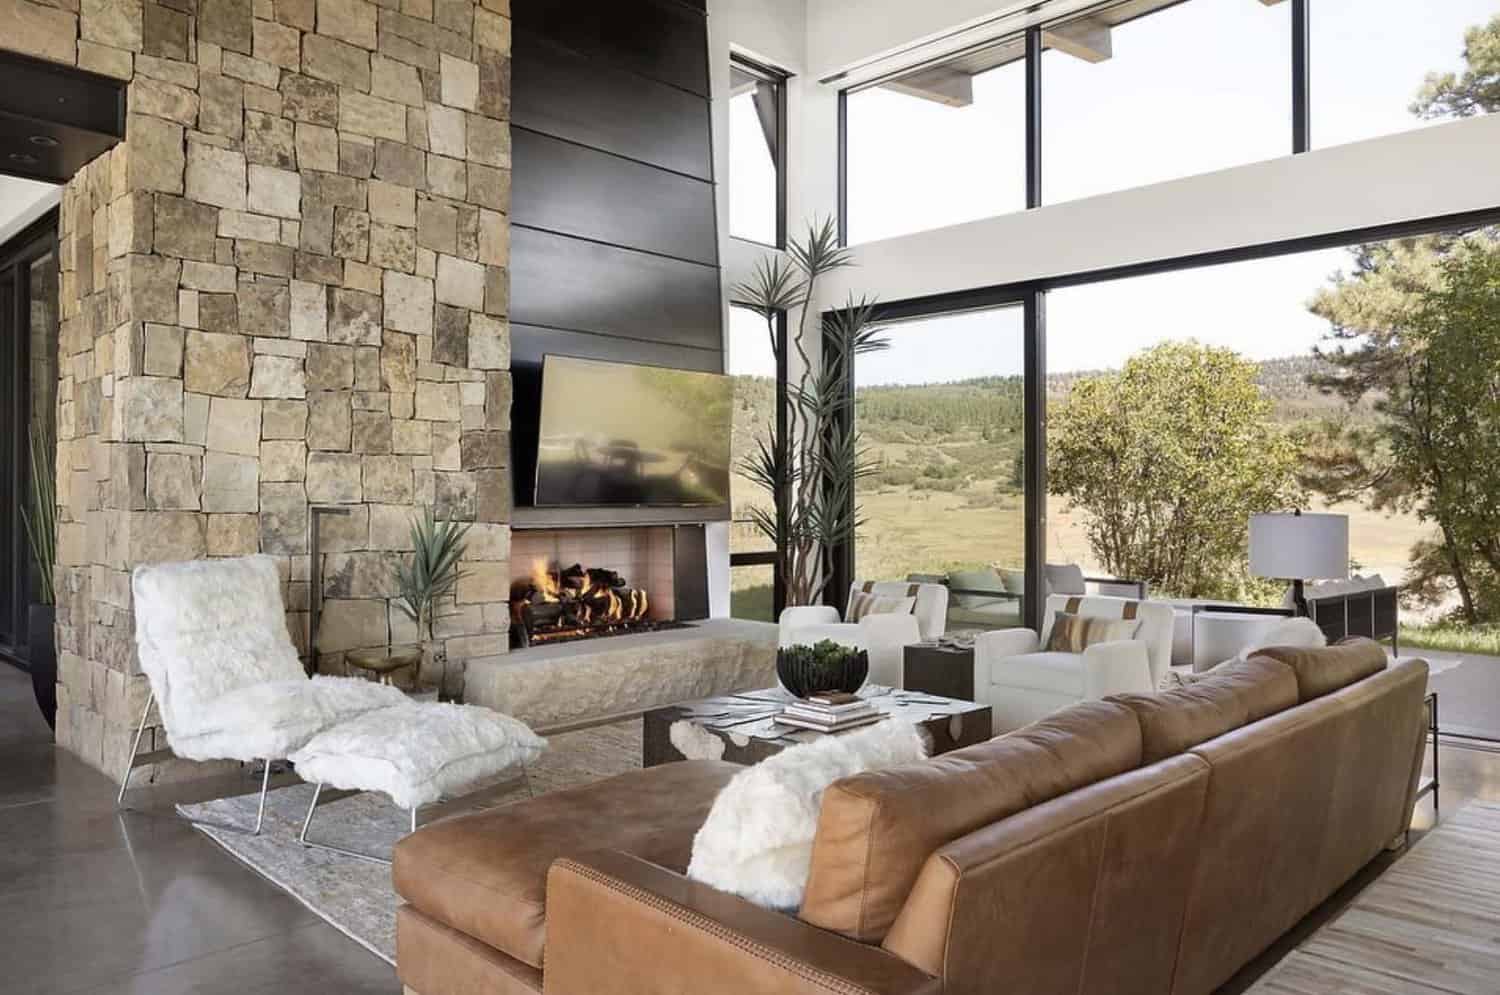 An unbelievable modern ranch house with views of the San Juan Mountains